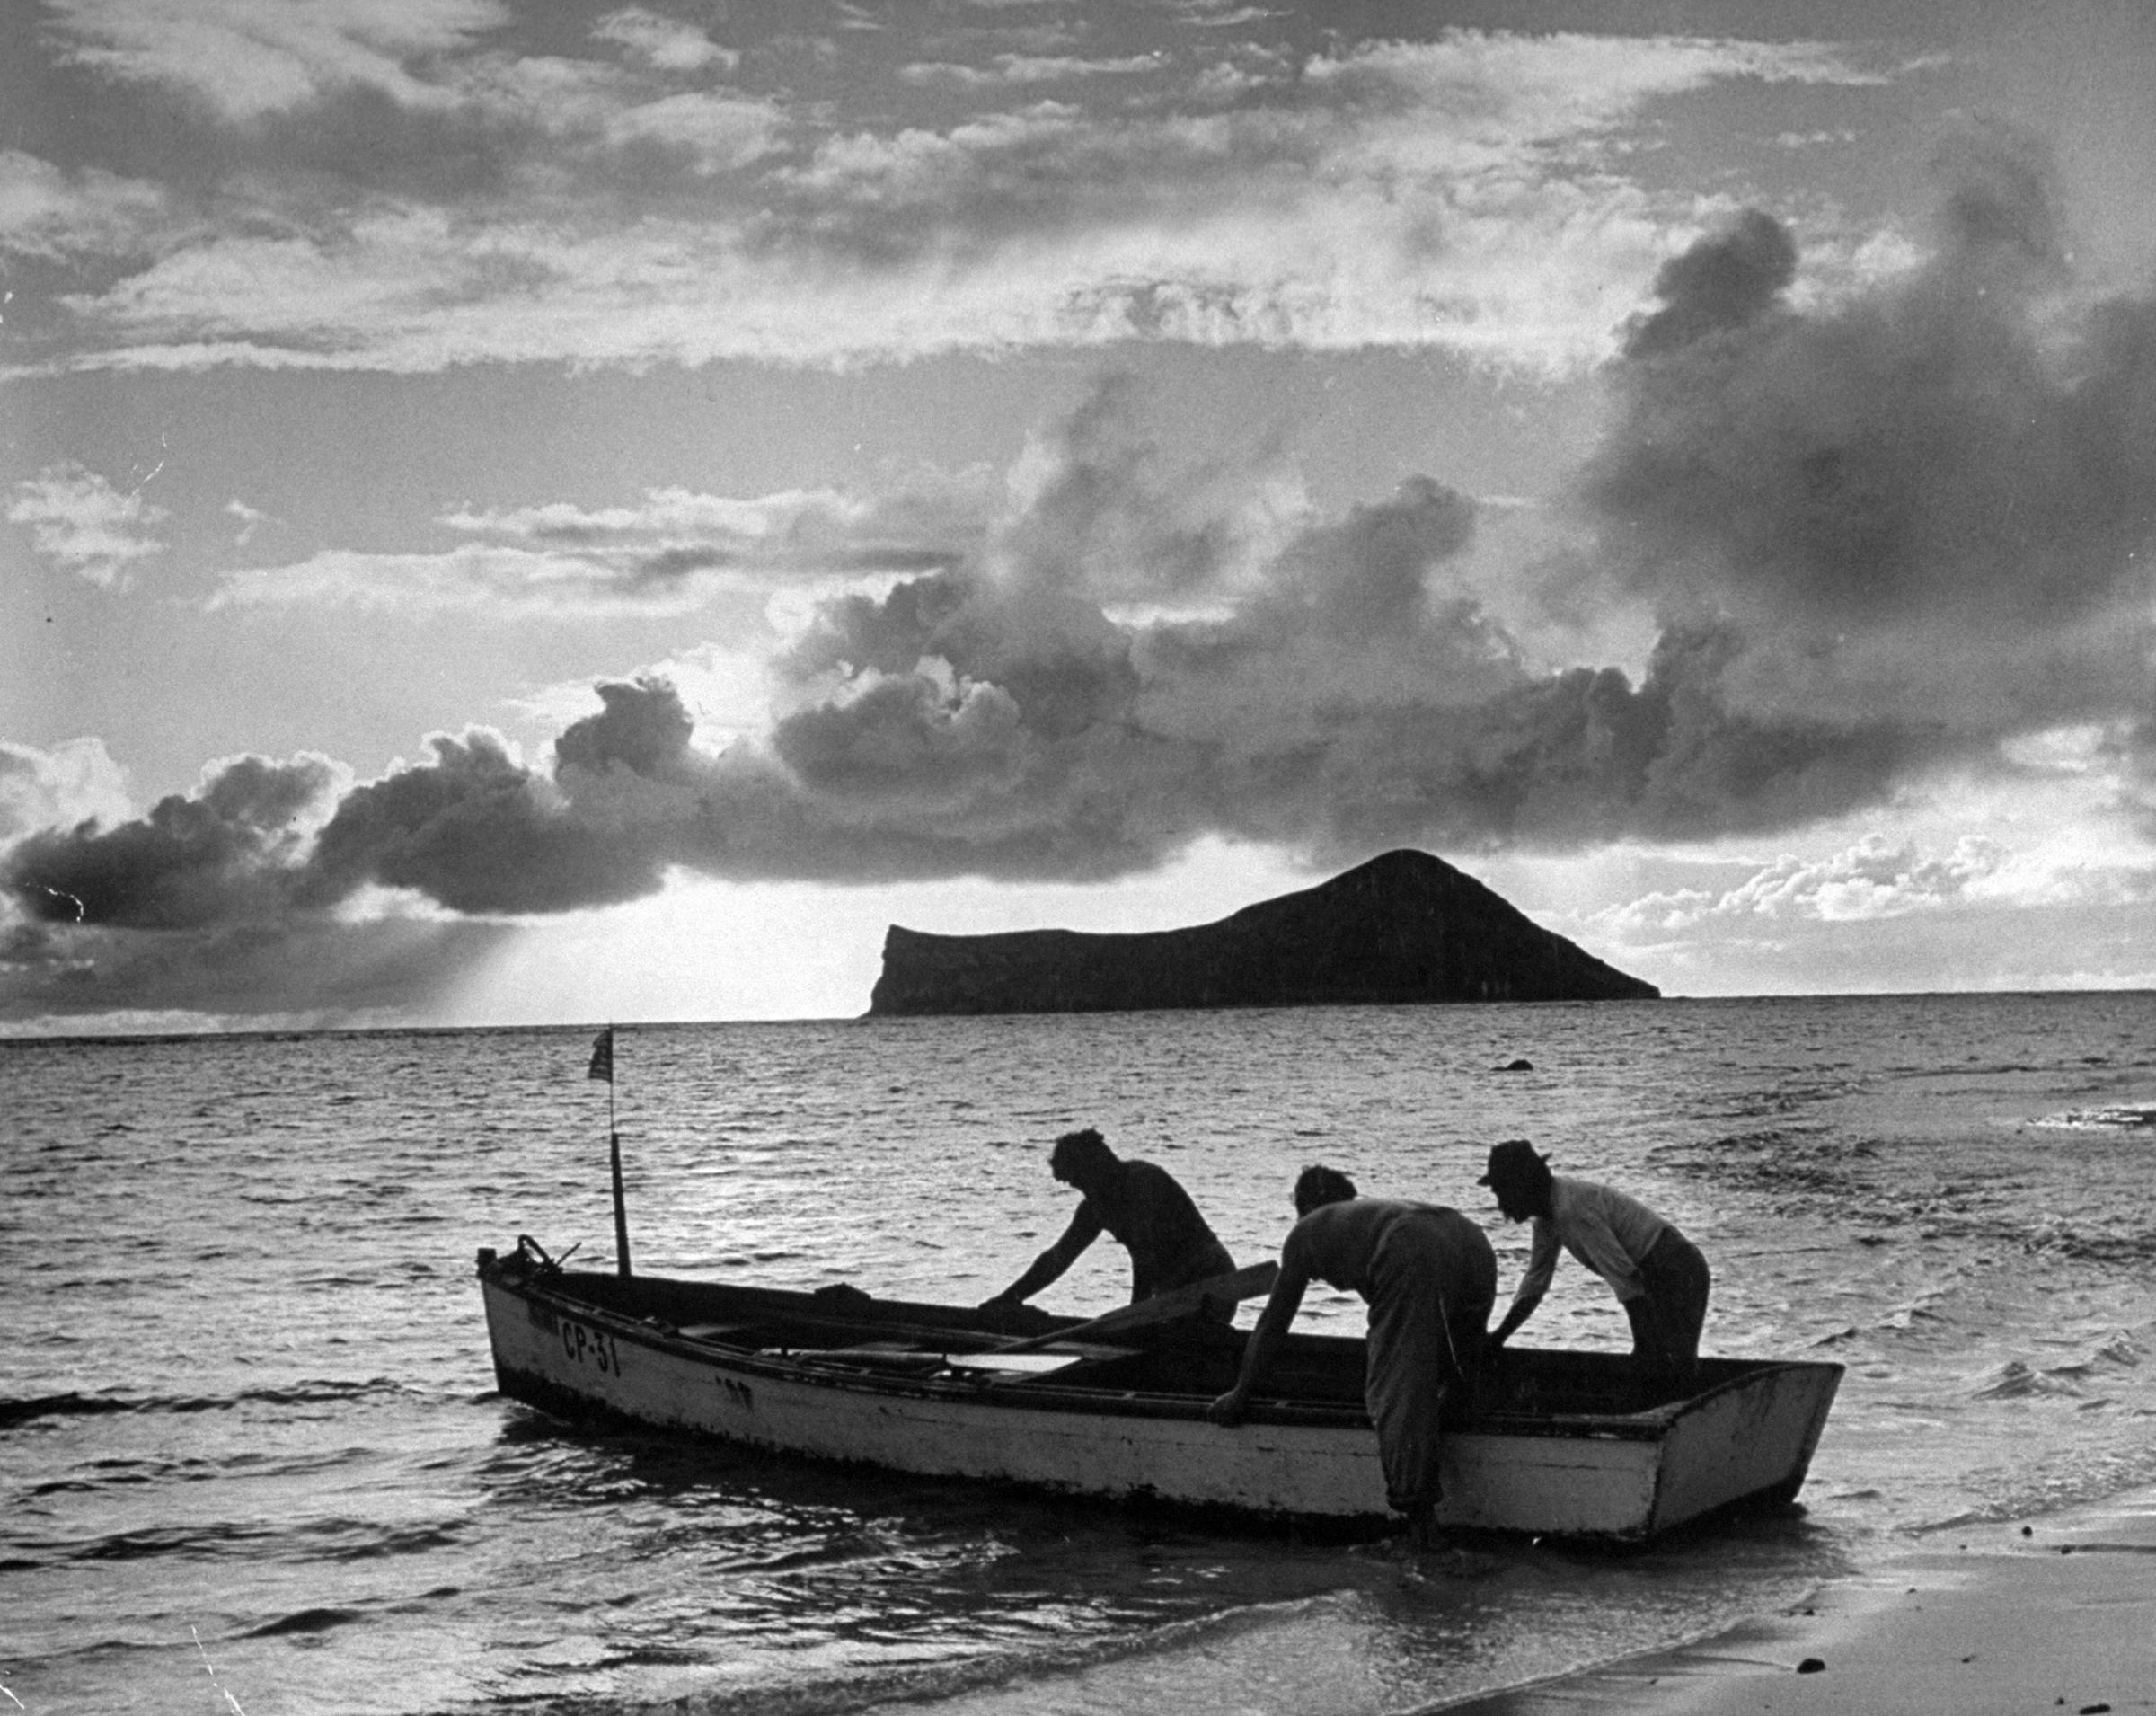 At dawn Hawaiians put out to sea to pull in their fish nets. By law, their boat flies the American flag at bow.